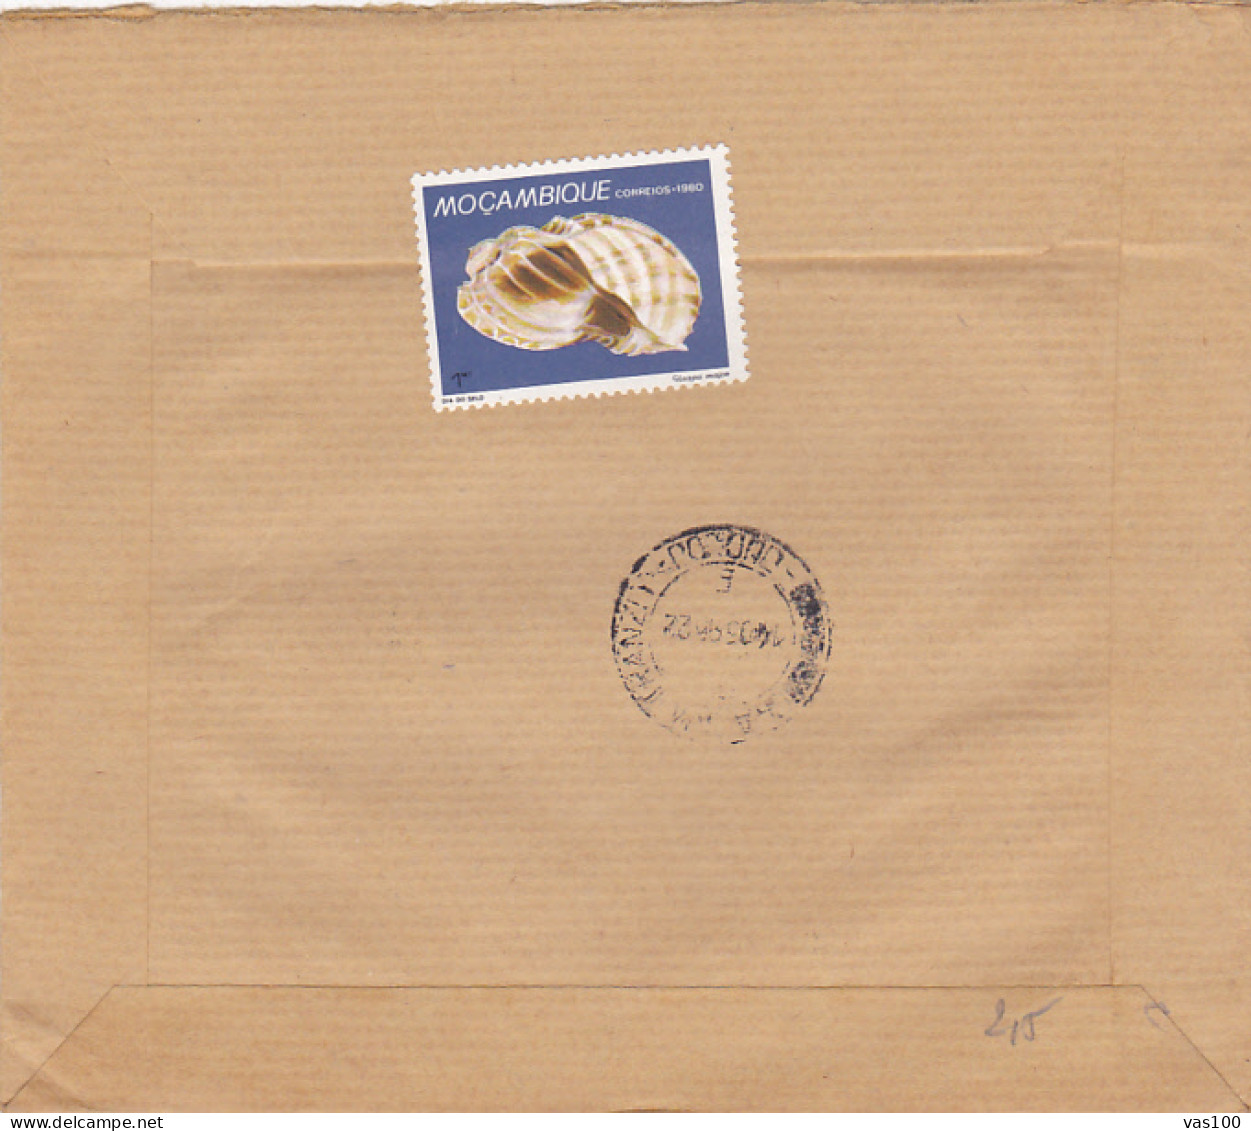 RELIGIOUS CHALICE, STAMPS ON COVER, 1996, PORTUGAL - Storia Postale